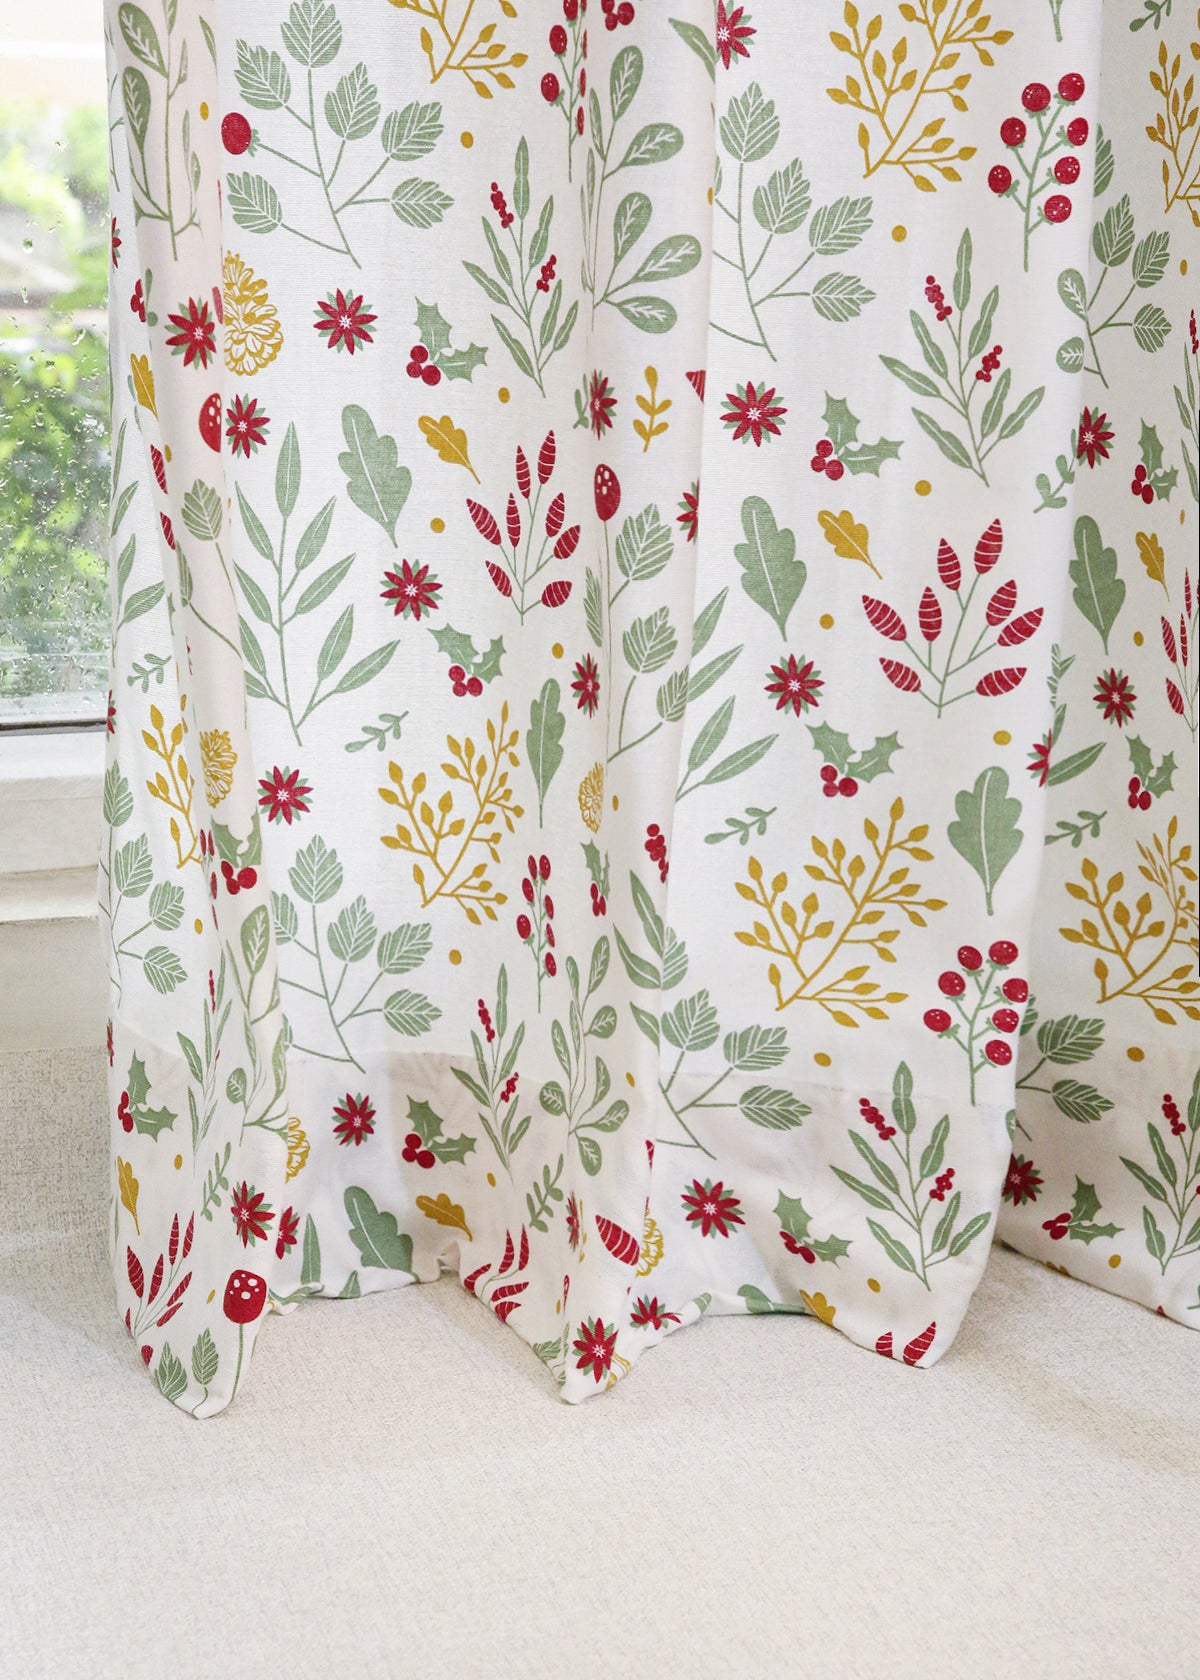 Foraged Berries 100% Customizable Cotton floral curtain for living room - Room darkening - Multicolor